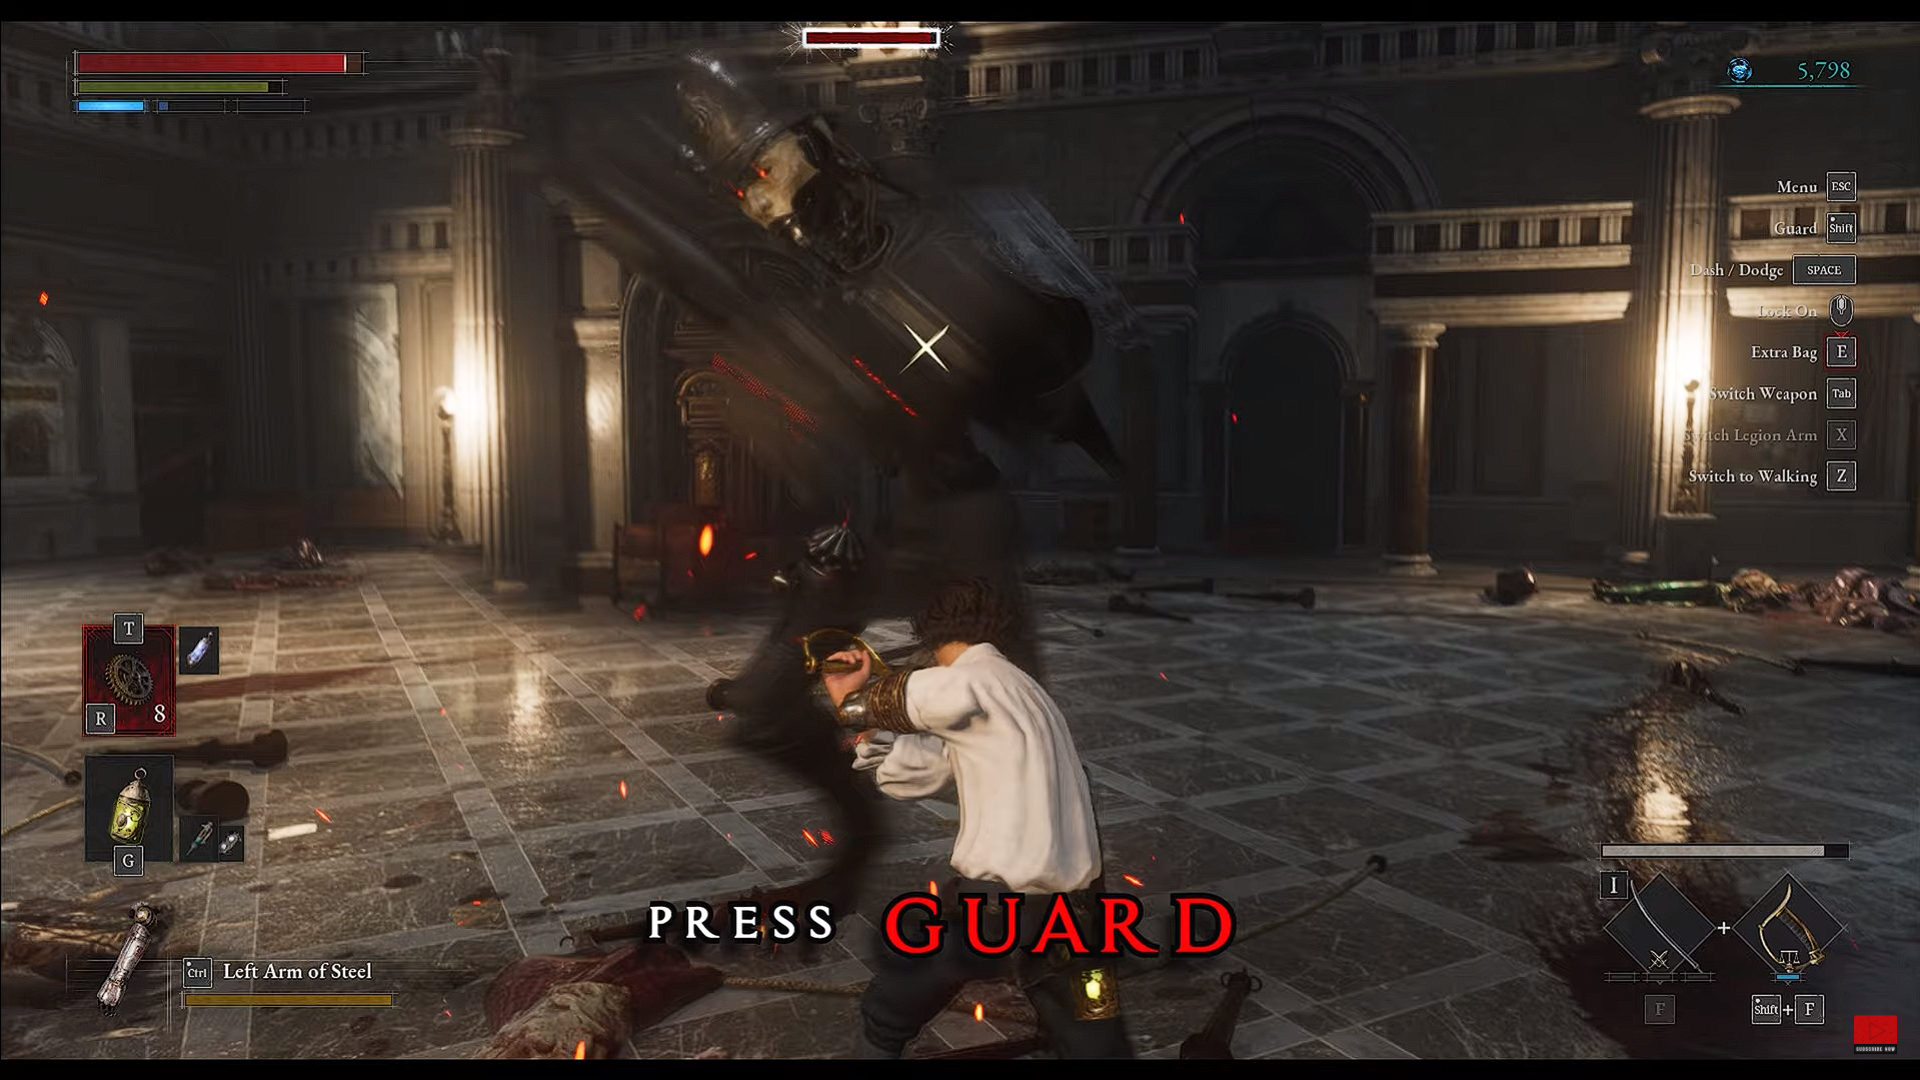 A screenshot of the Perfect Guard action in Lies of P.